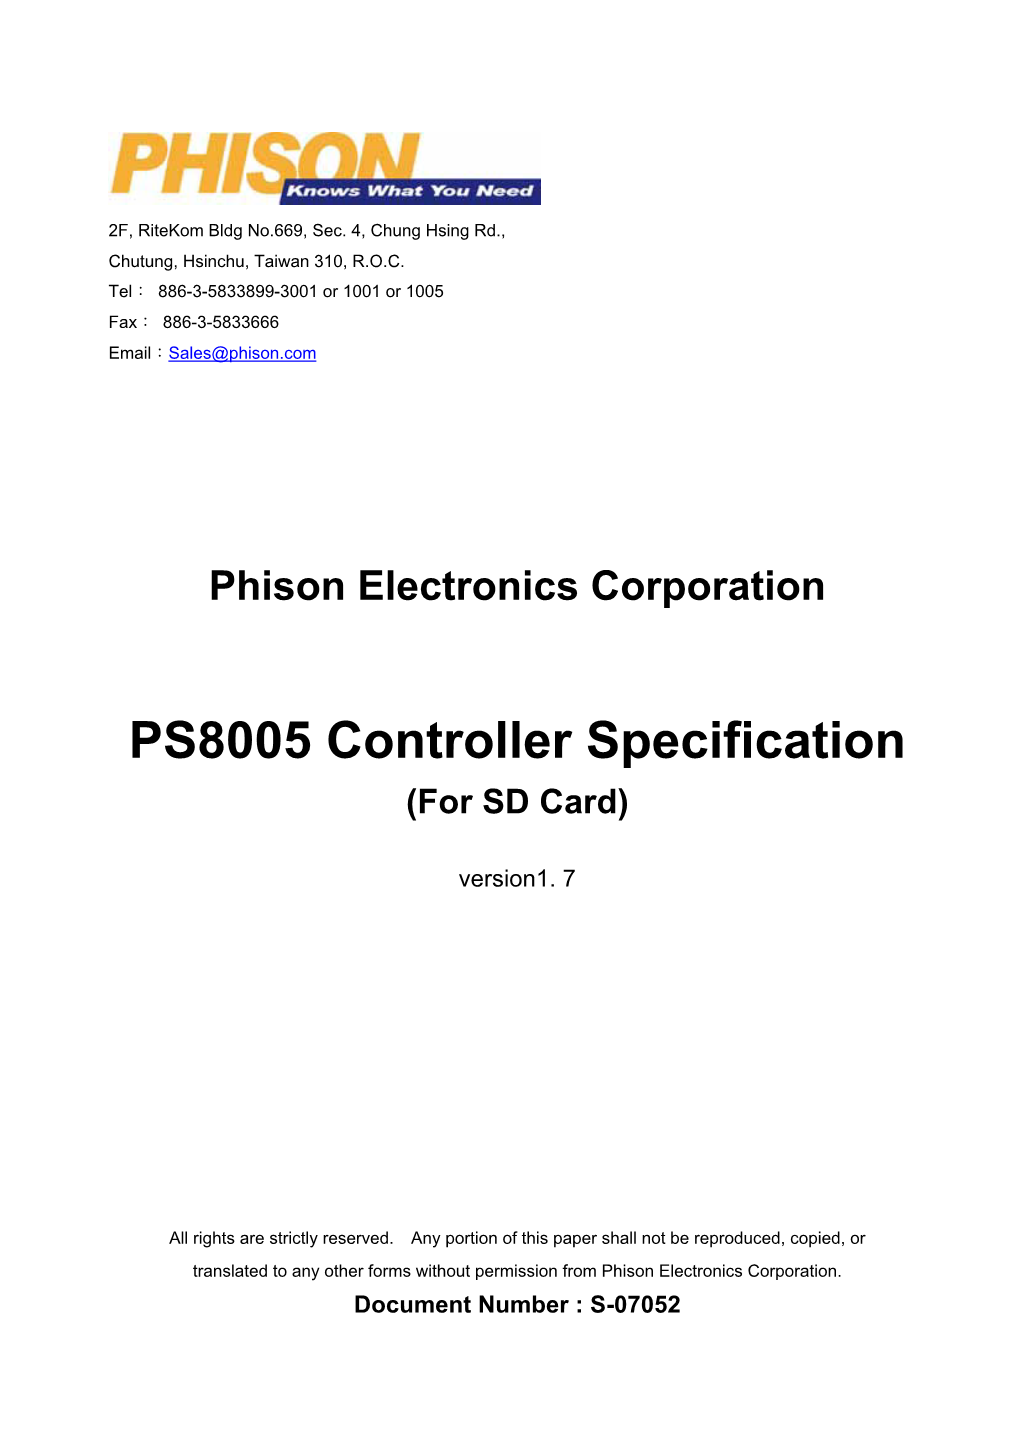 PS8005 Controller Specification (For SD Card)